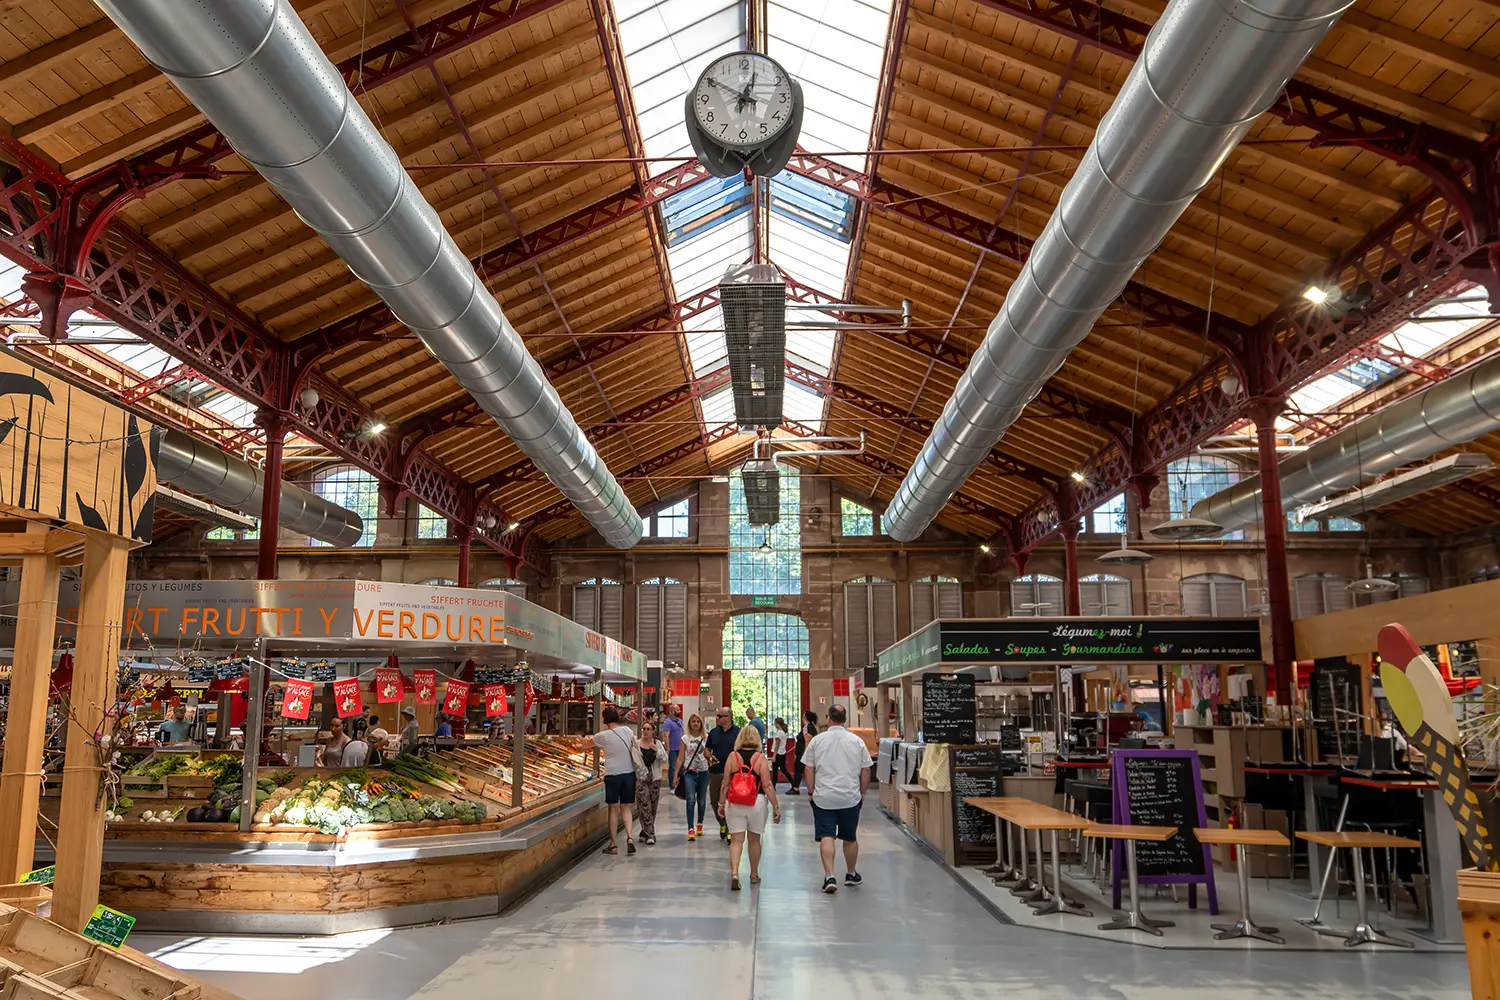 Marché Couvert in Colmar, France